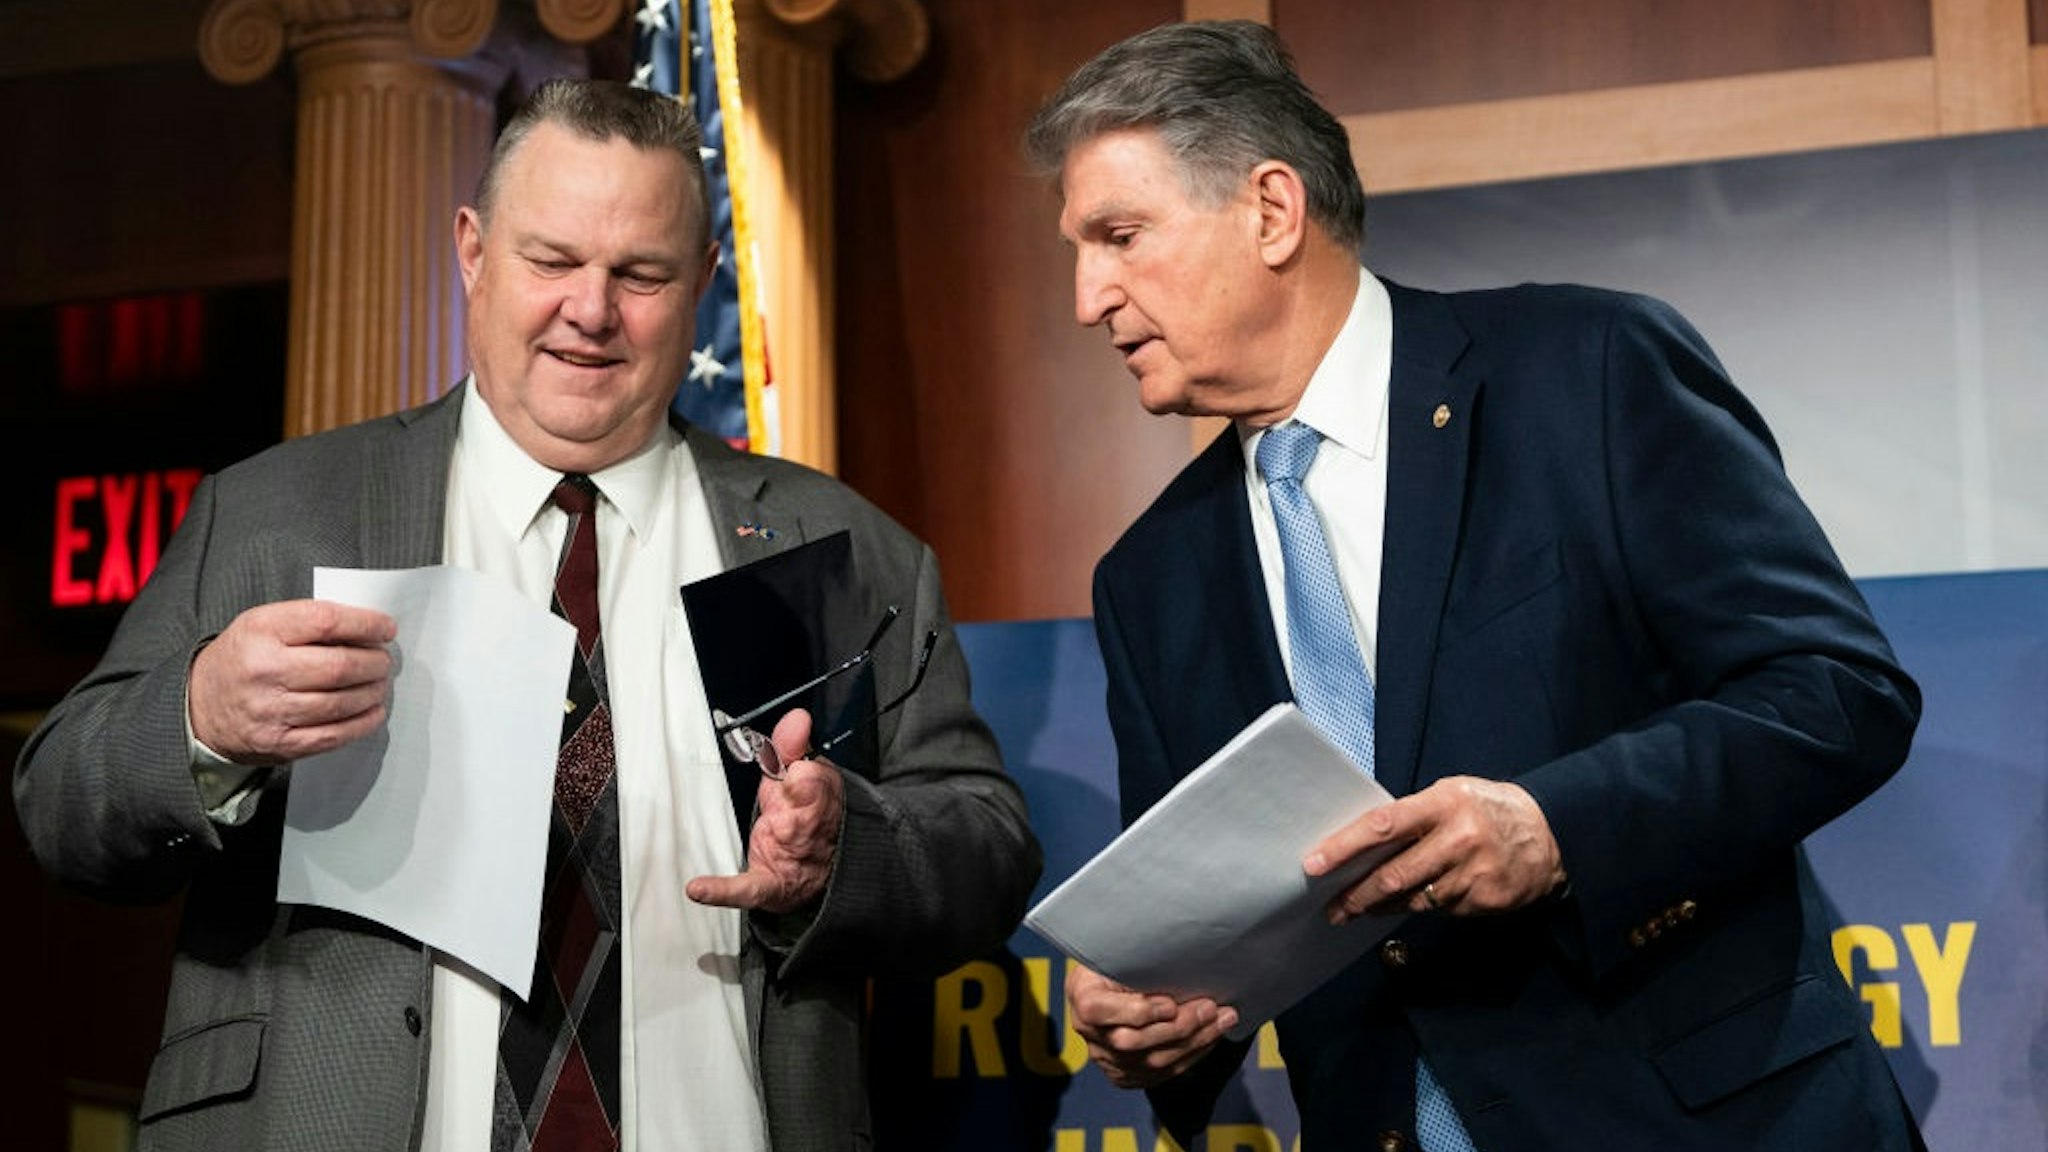 UNITED STATES - MARCH 3: Sen. Jon Tester, D-Mont., left, and Sen. Joe Manchin, D-W. Va., talk beofre the start of the Ban Russian Energy Imports Act news conference in the Capitol on Thursday, March 3, 2022.